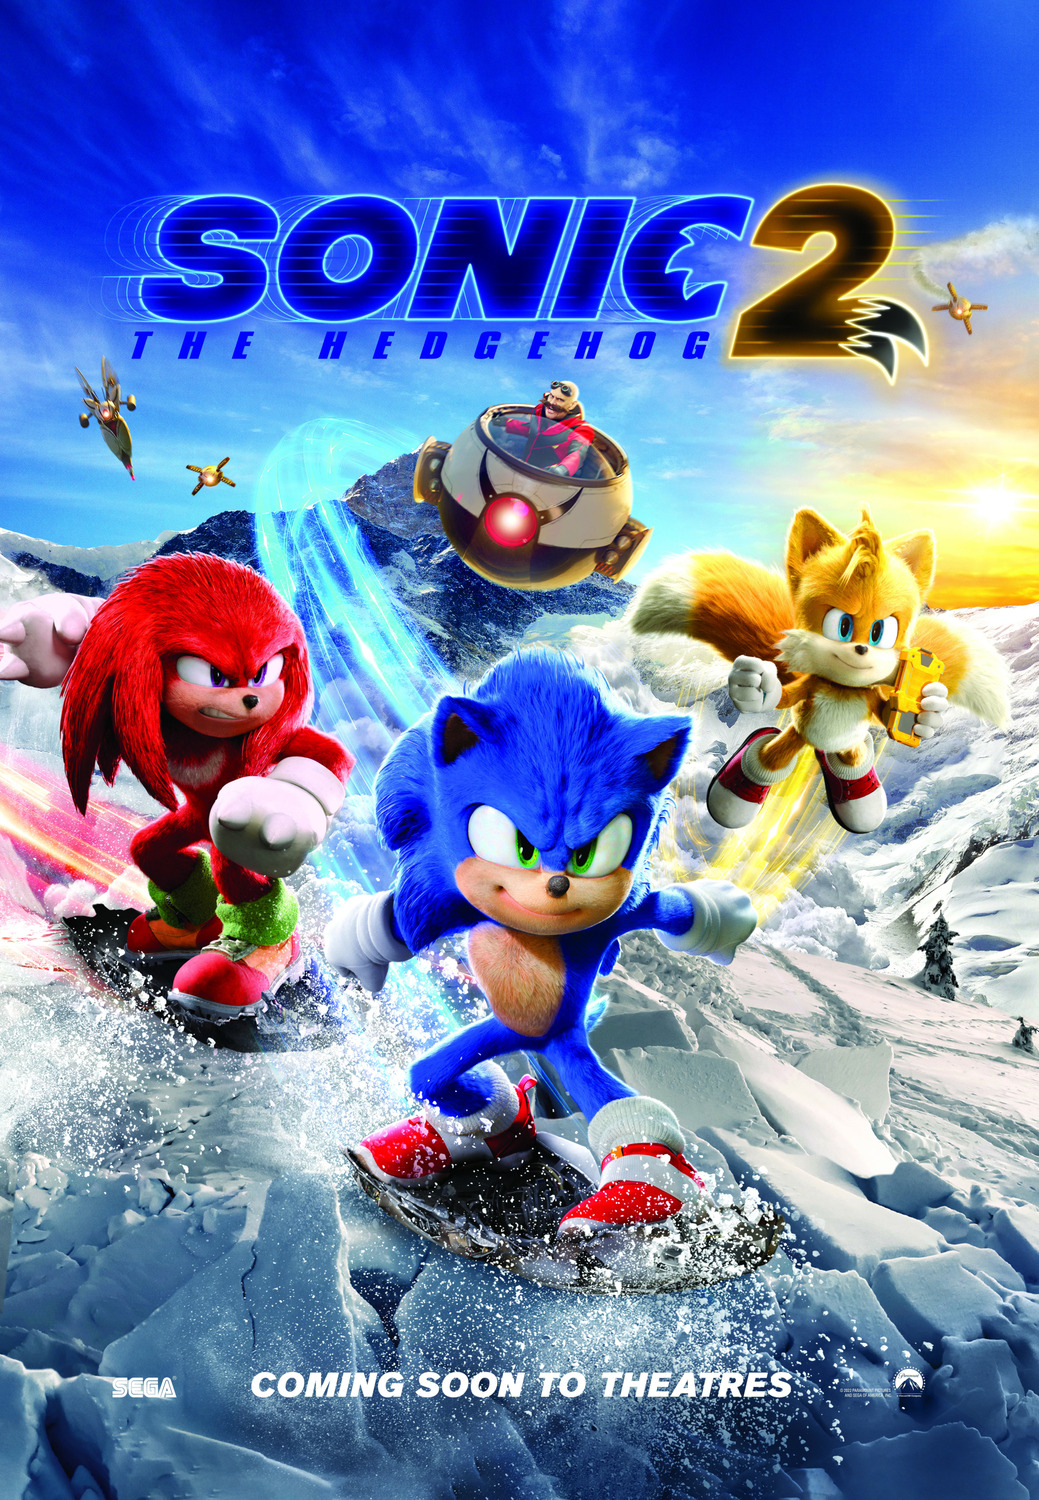 Sonic the Hedgehog Movie Poster (#27 of 28) - IMP Awards